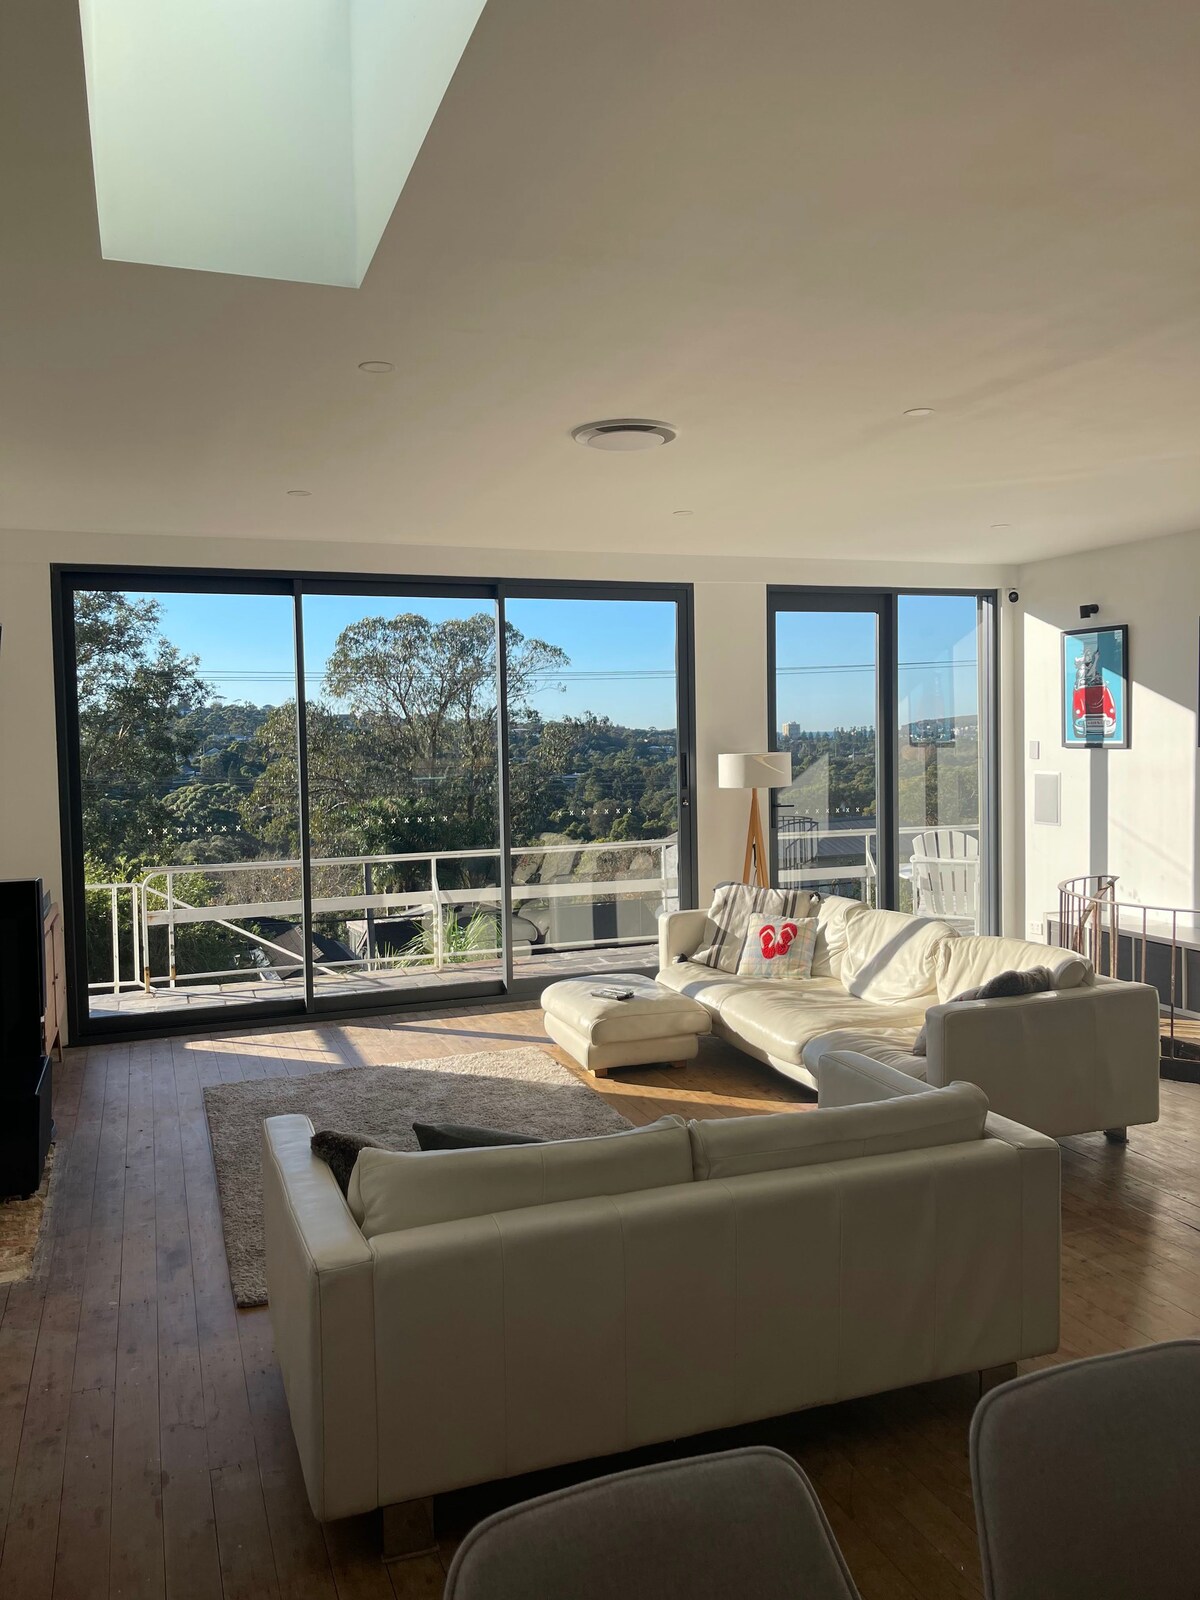 Calm away from home - guest room (near Manly)